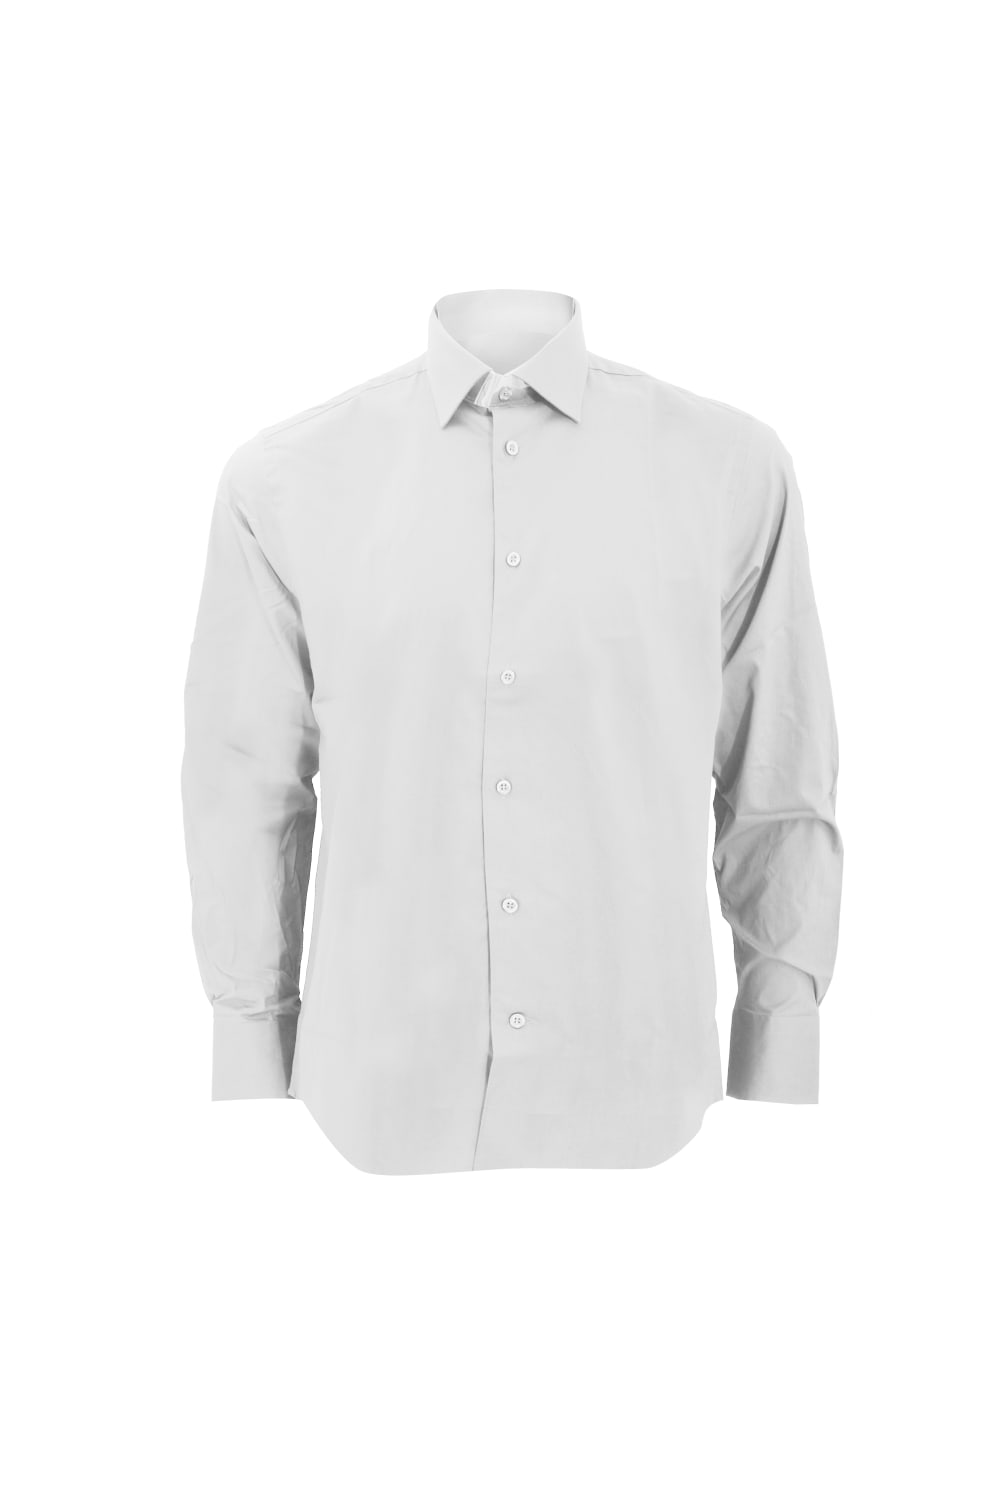 Russell Collection Mens Long Sleeve Easy Care Fitted Shirt (White)